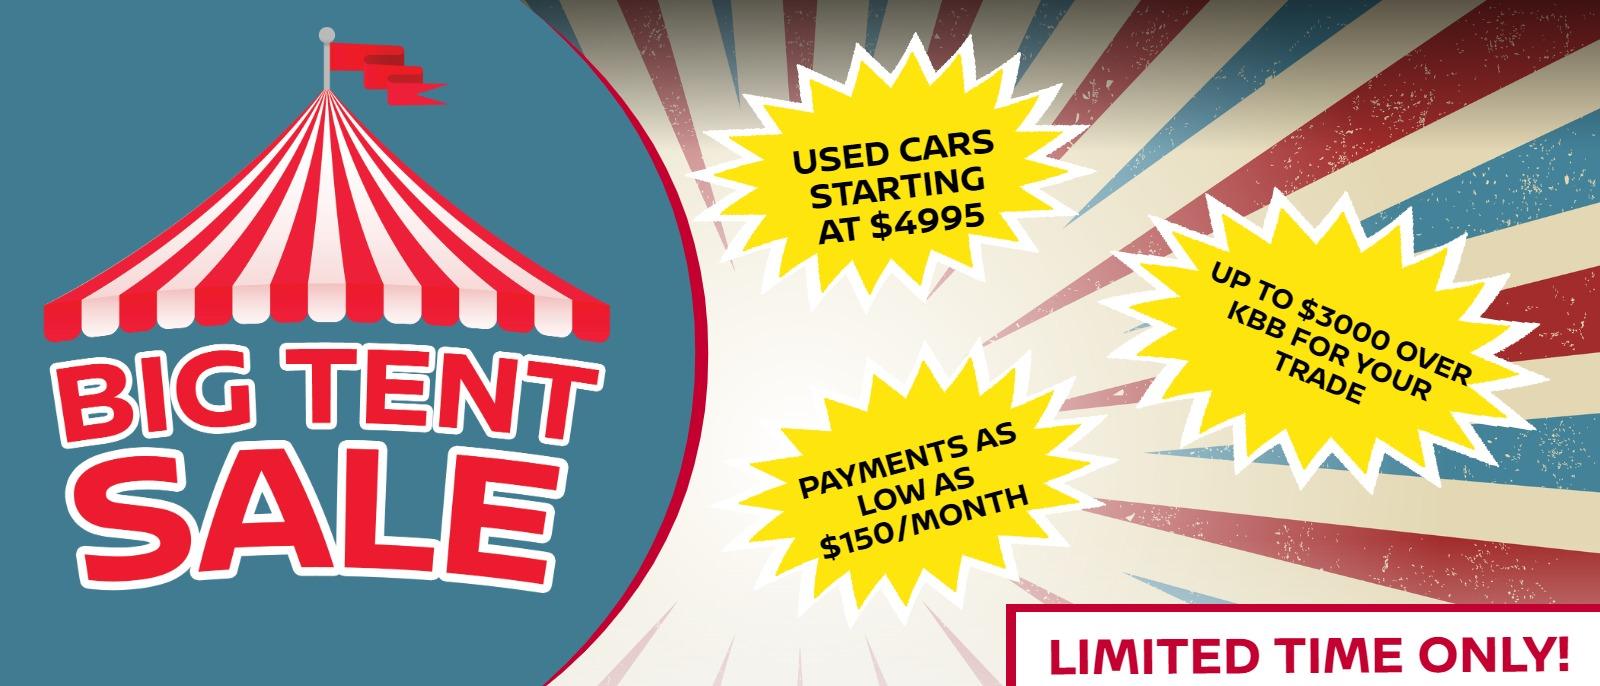 used cars starting at $4995
Up to $3000 over KBB for your trade
Payments as low as $150/month